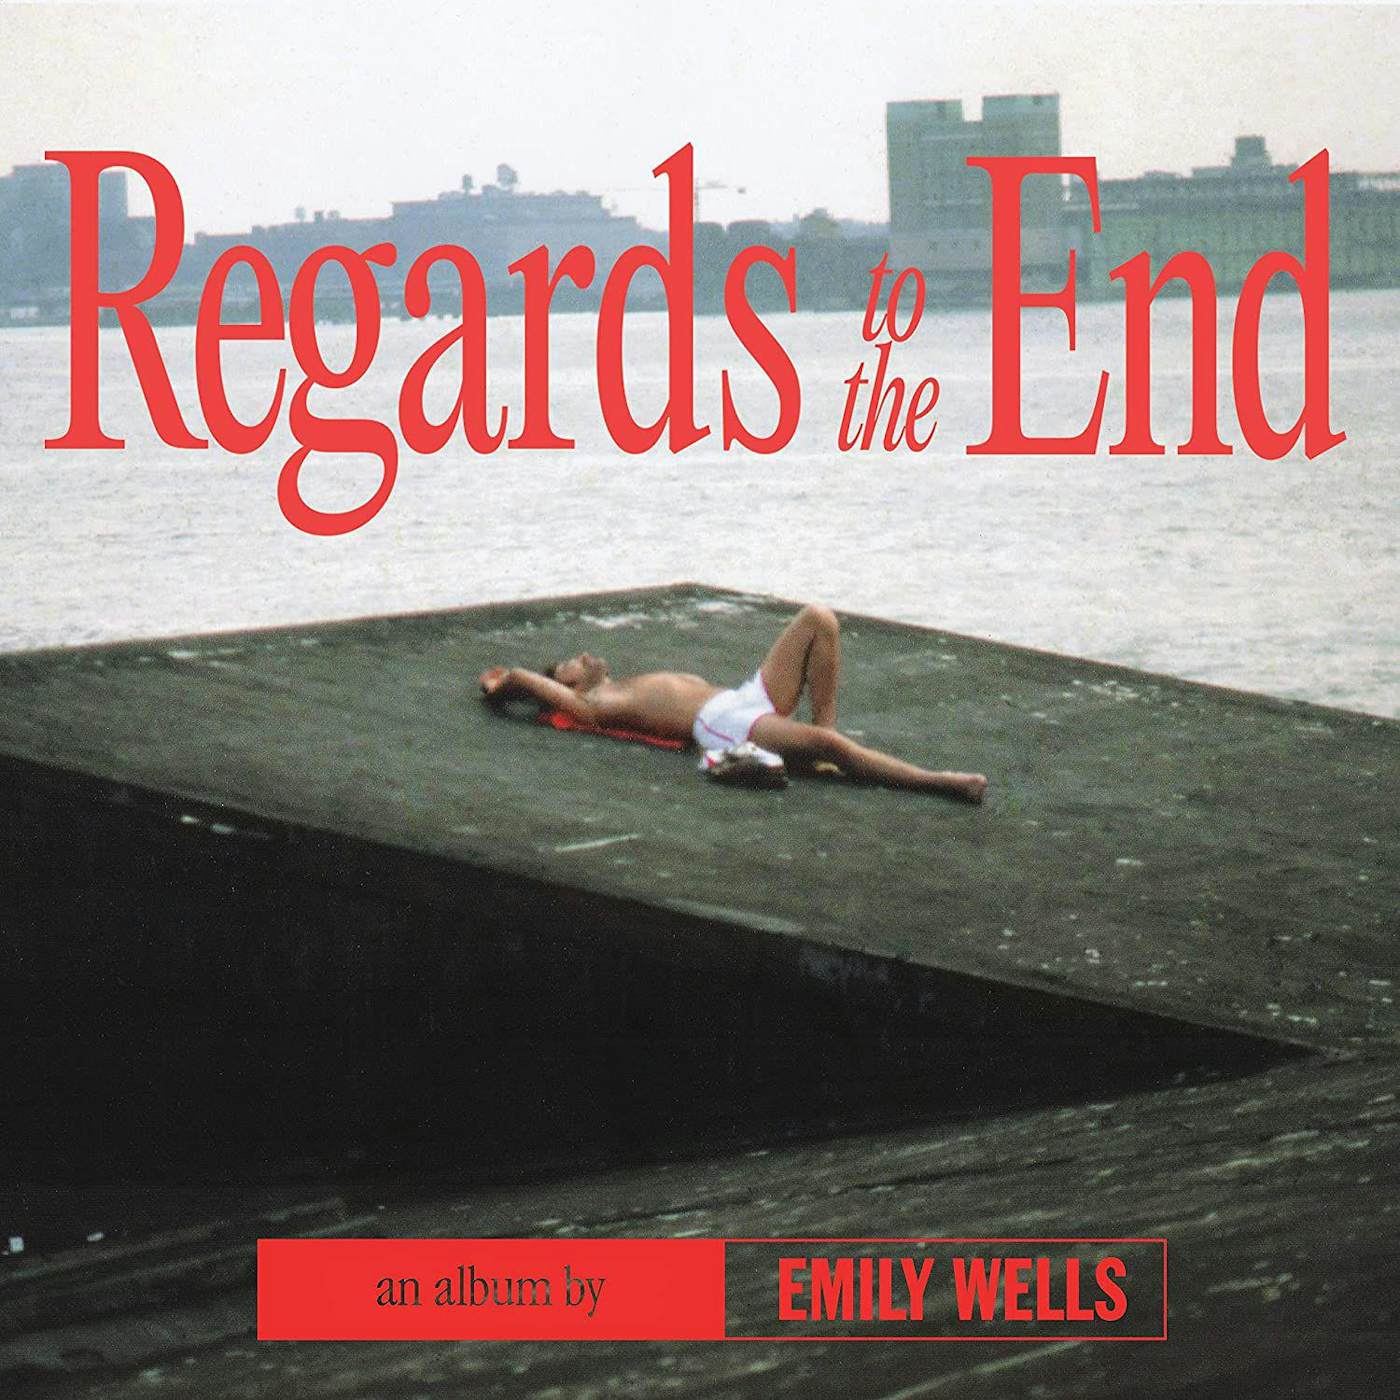 Emily Wells Regards to the End Vinyl Record